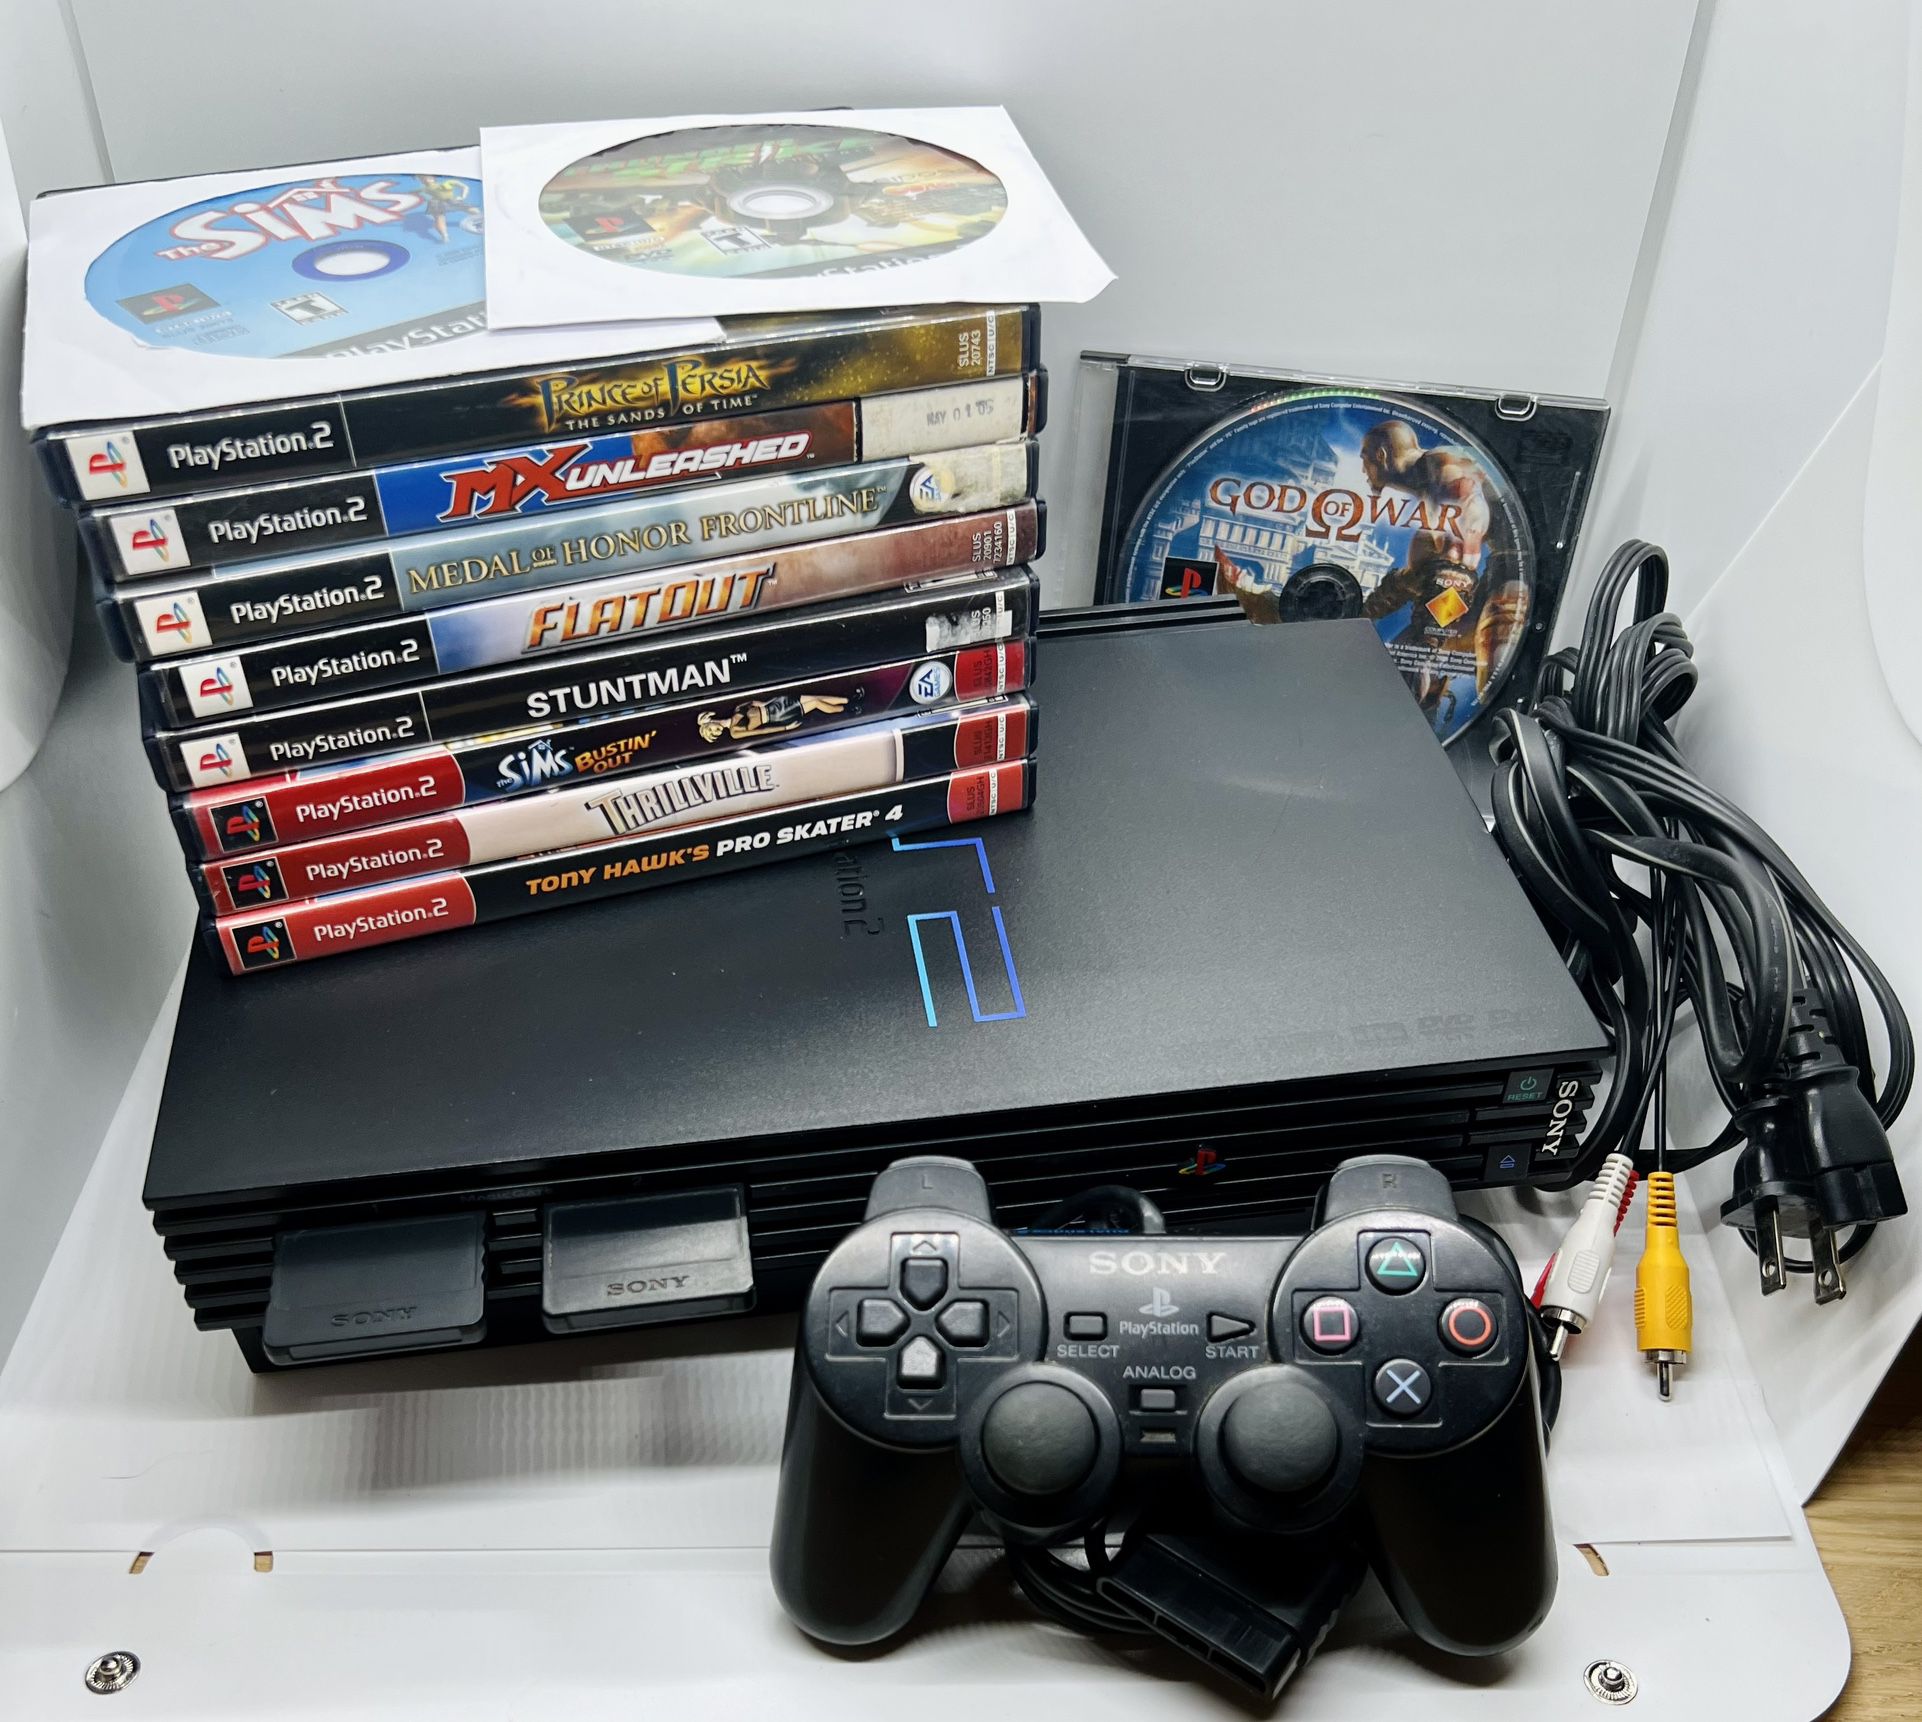 Sony Playstation 2 PS2 Online Pack Console Bundle w Authentic Box & Games Tested